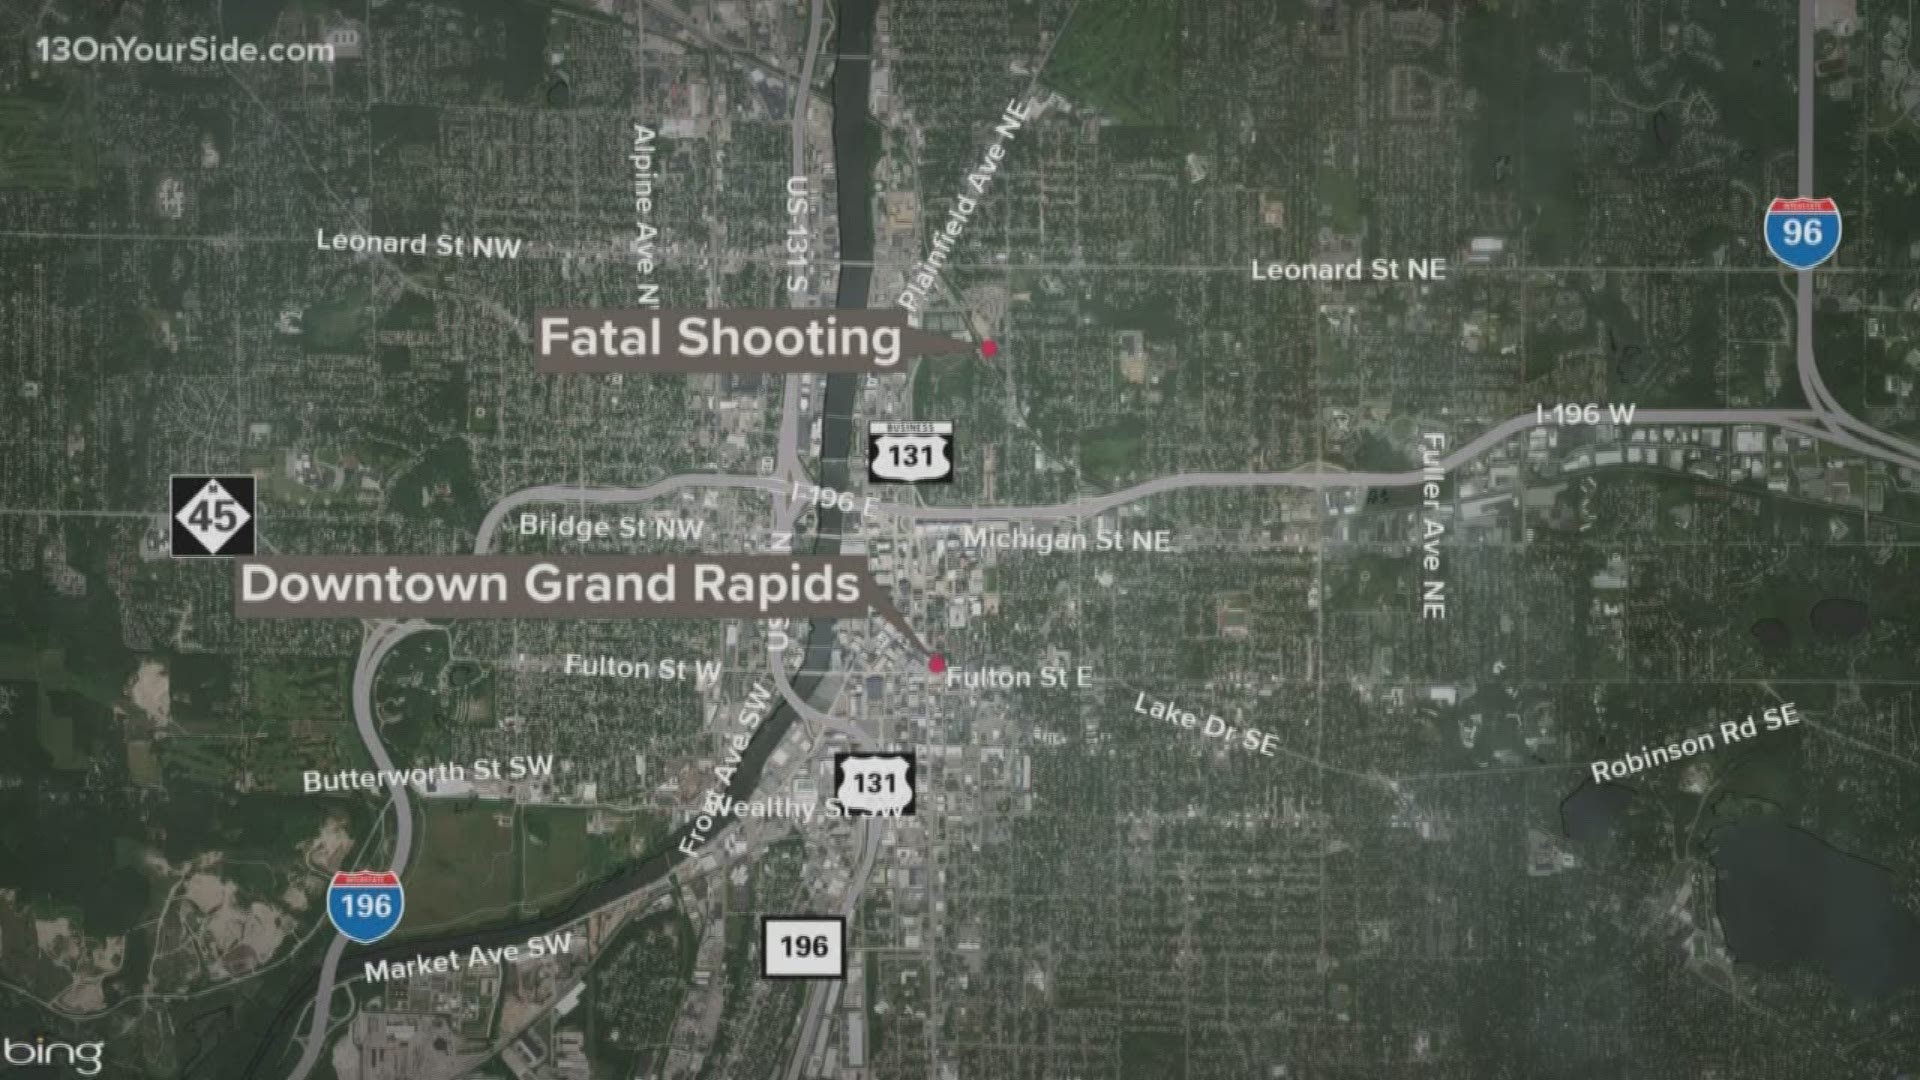 One man was fatally shot on the northeast side of Grand Rapids overnight Sunday.  The Grand Rapids Police Department said the shooting occurred on Clancy Avenue NE near Cedar Street NE. The victim was transported to the hospital where he later died from his injuries.